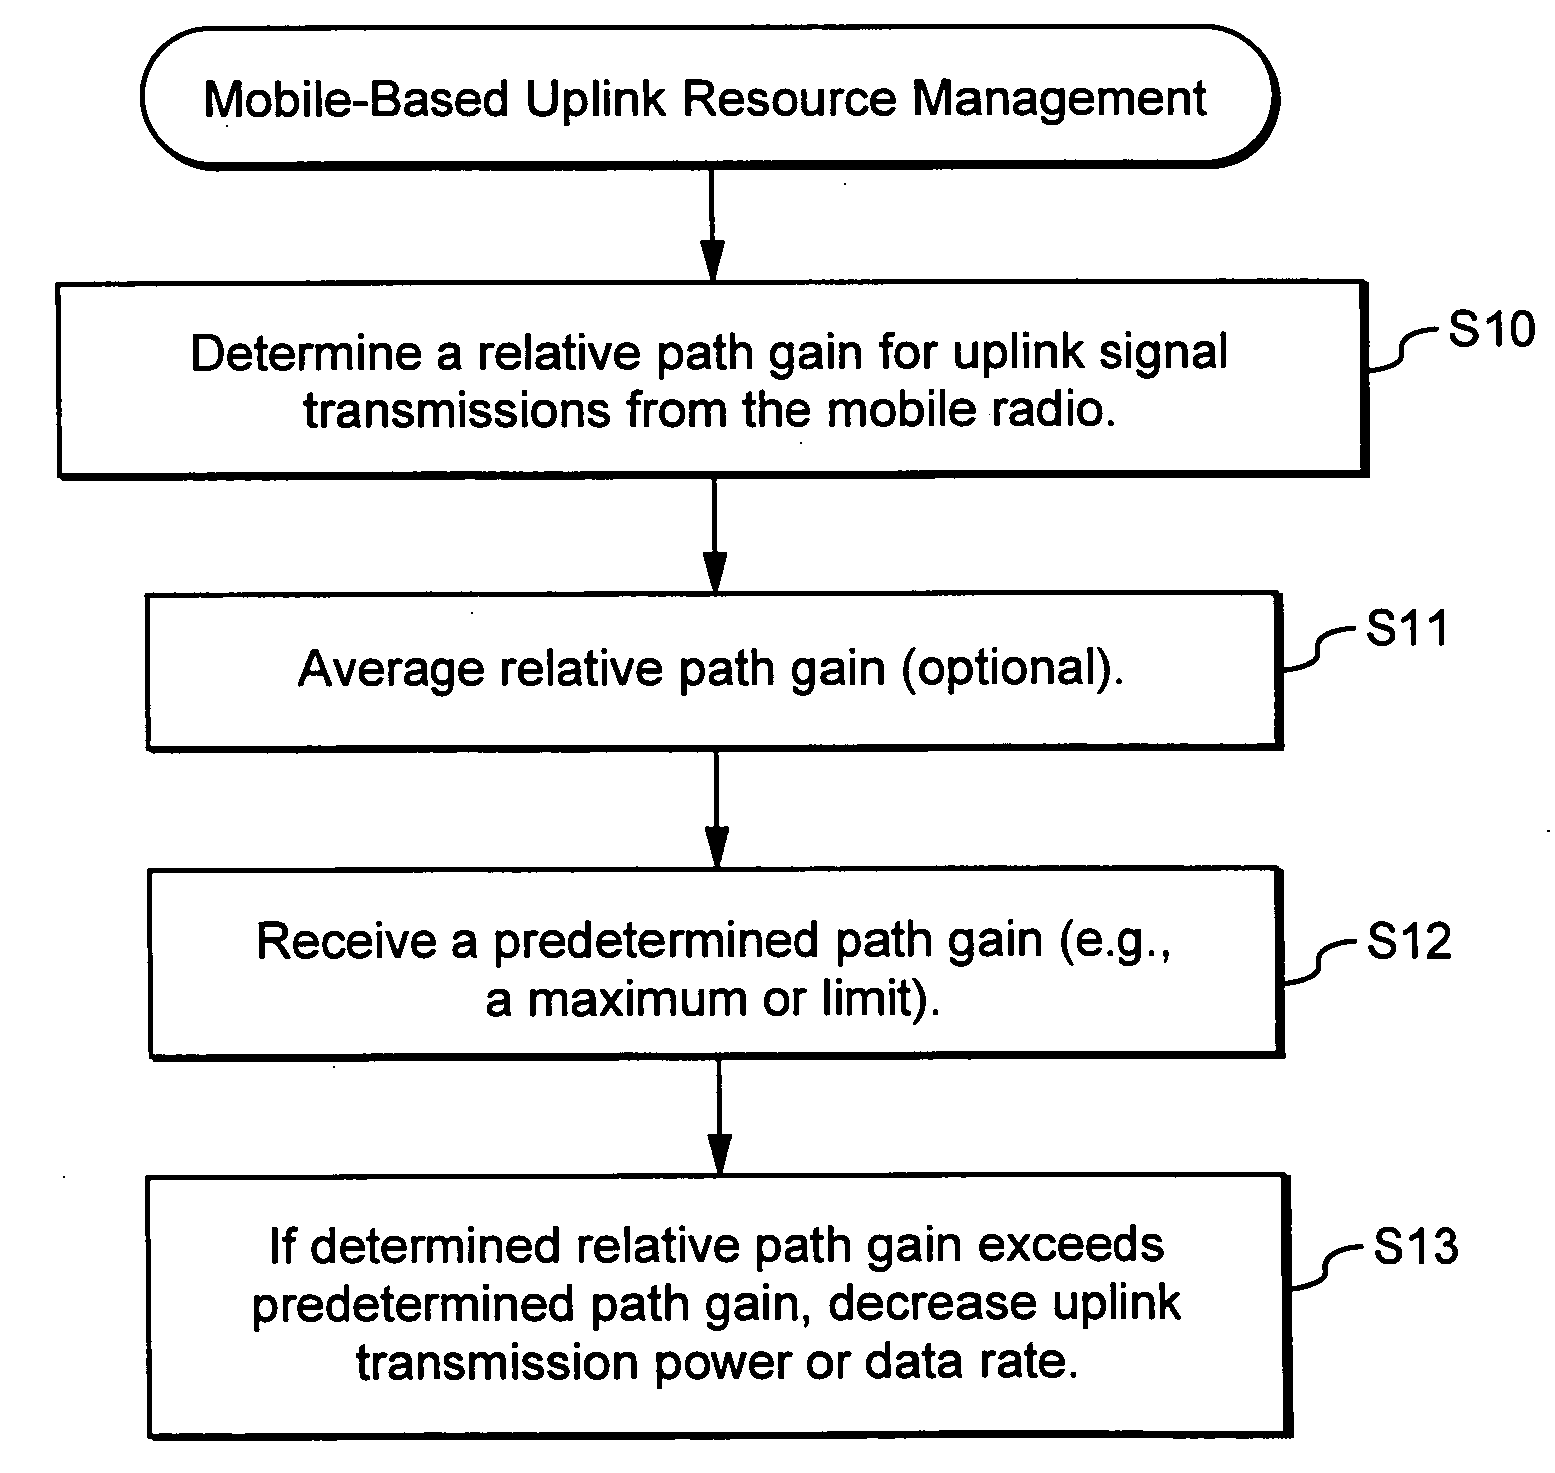 Using uplink relative path gain related measurements to support uplink resource management